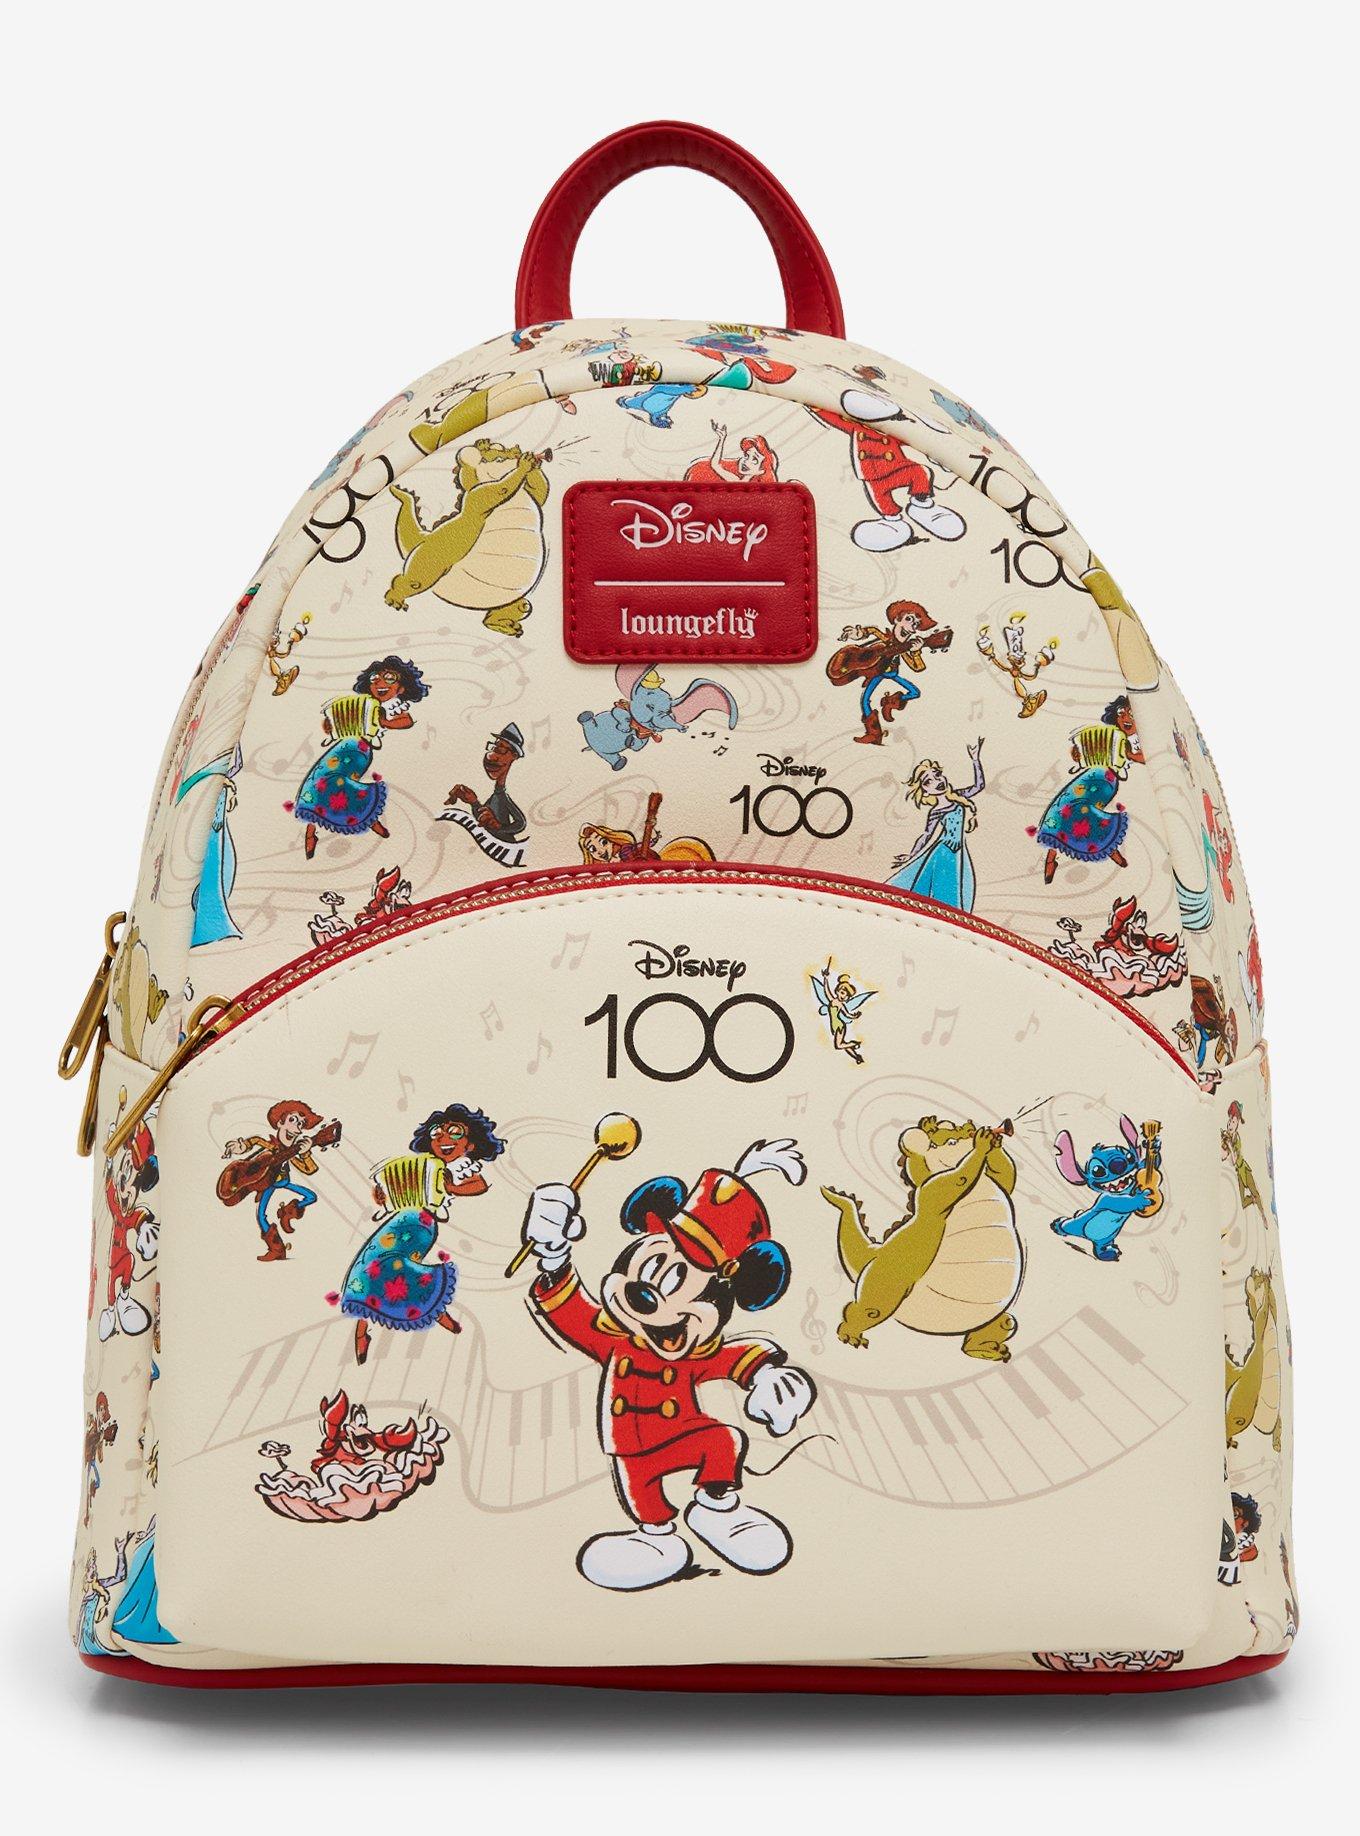 Loungefly Disney 100th Anniversary Mickey & Friends Mini Backpack